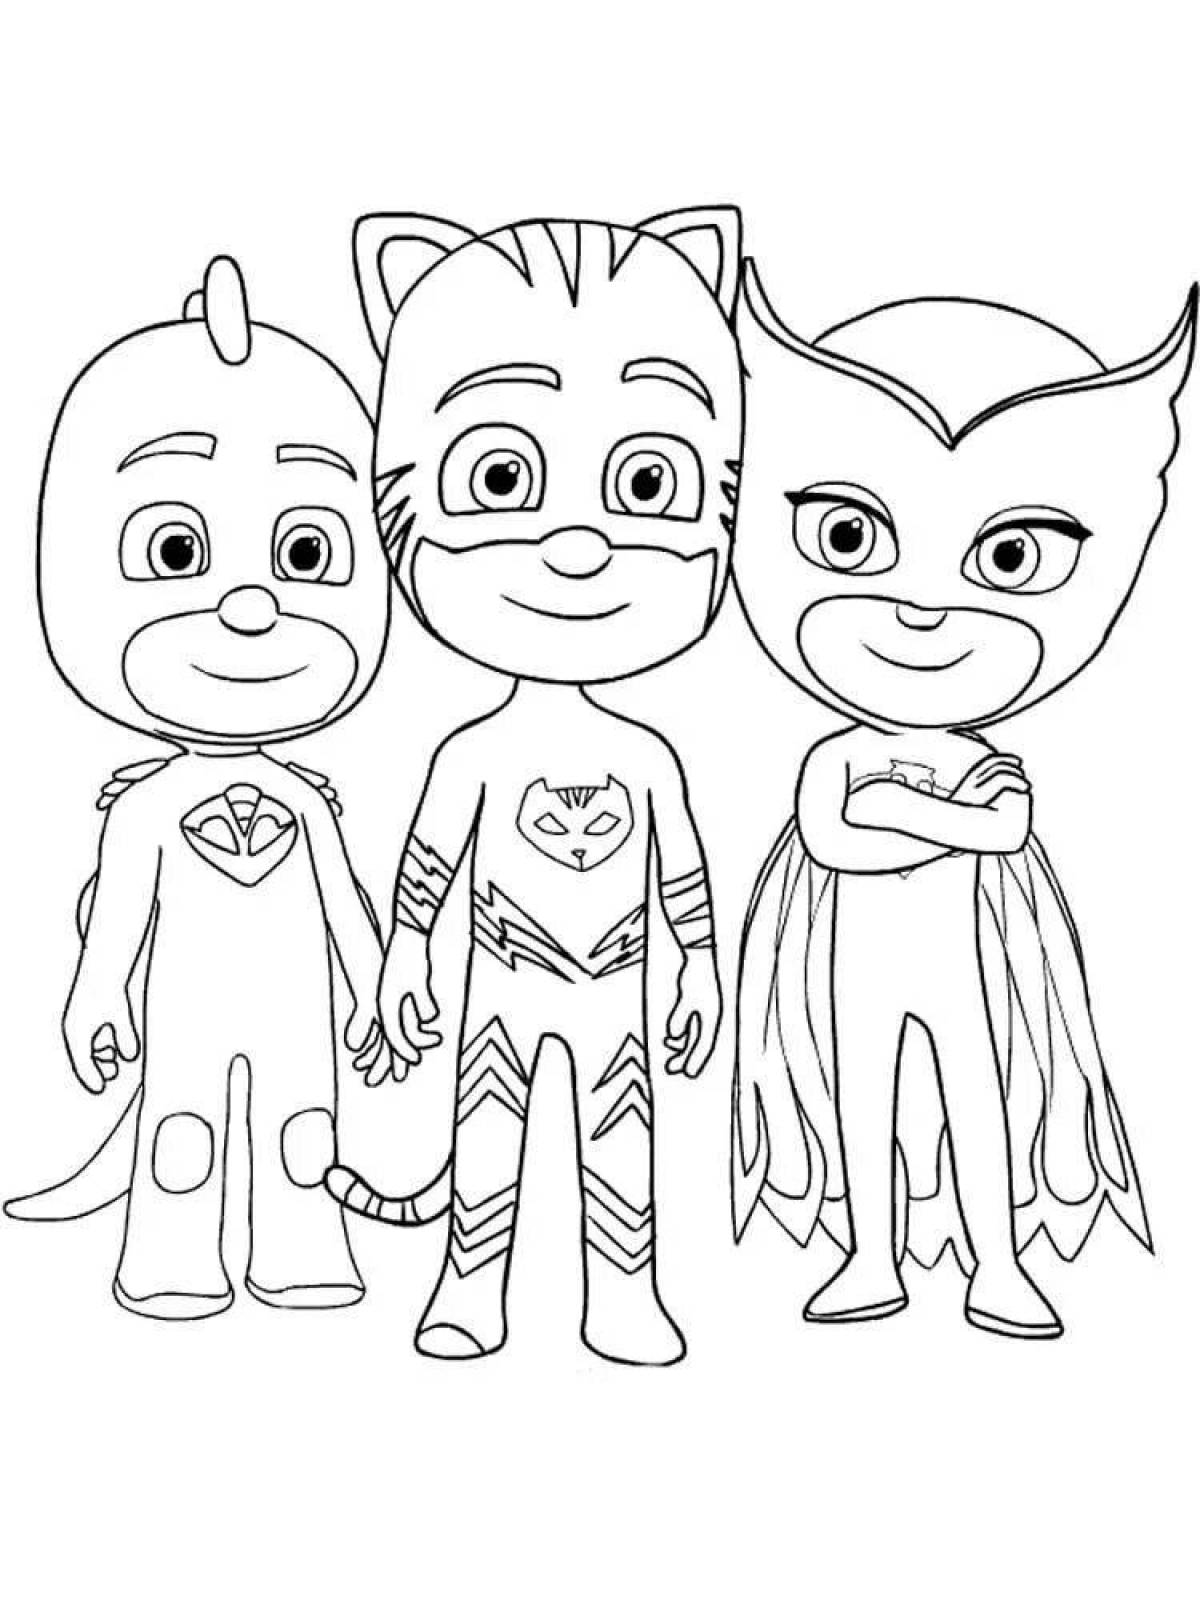 Coloring page adorable masked characters